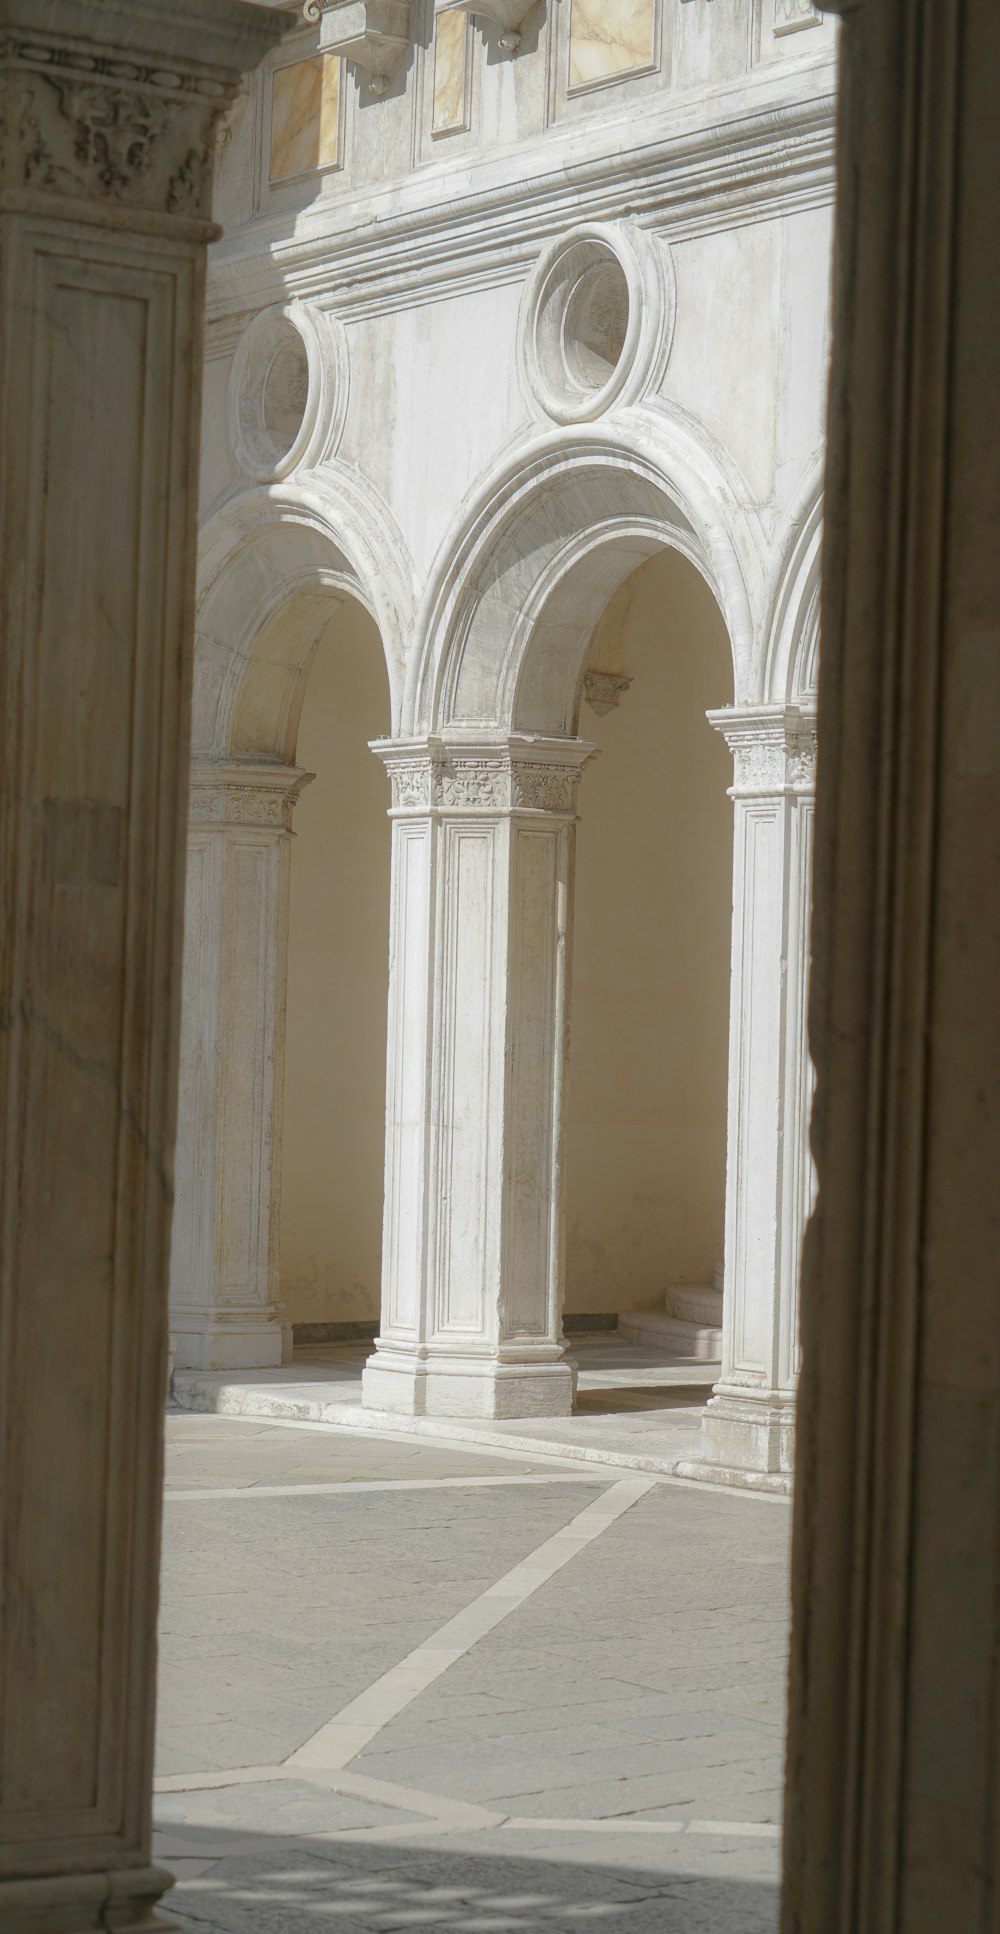 a white building with columns and a clock